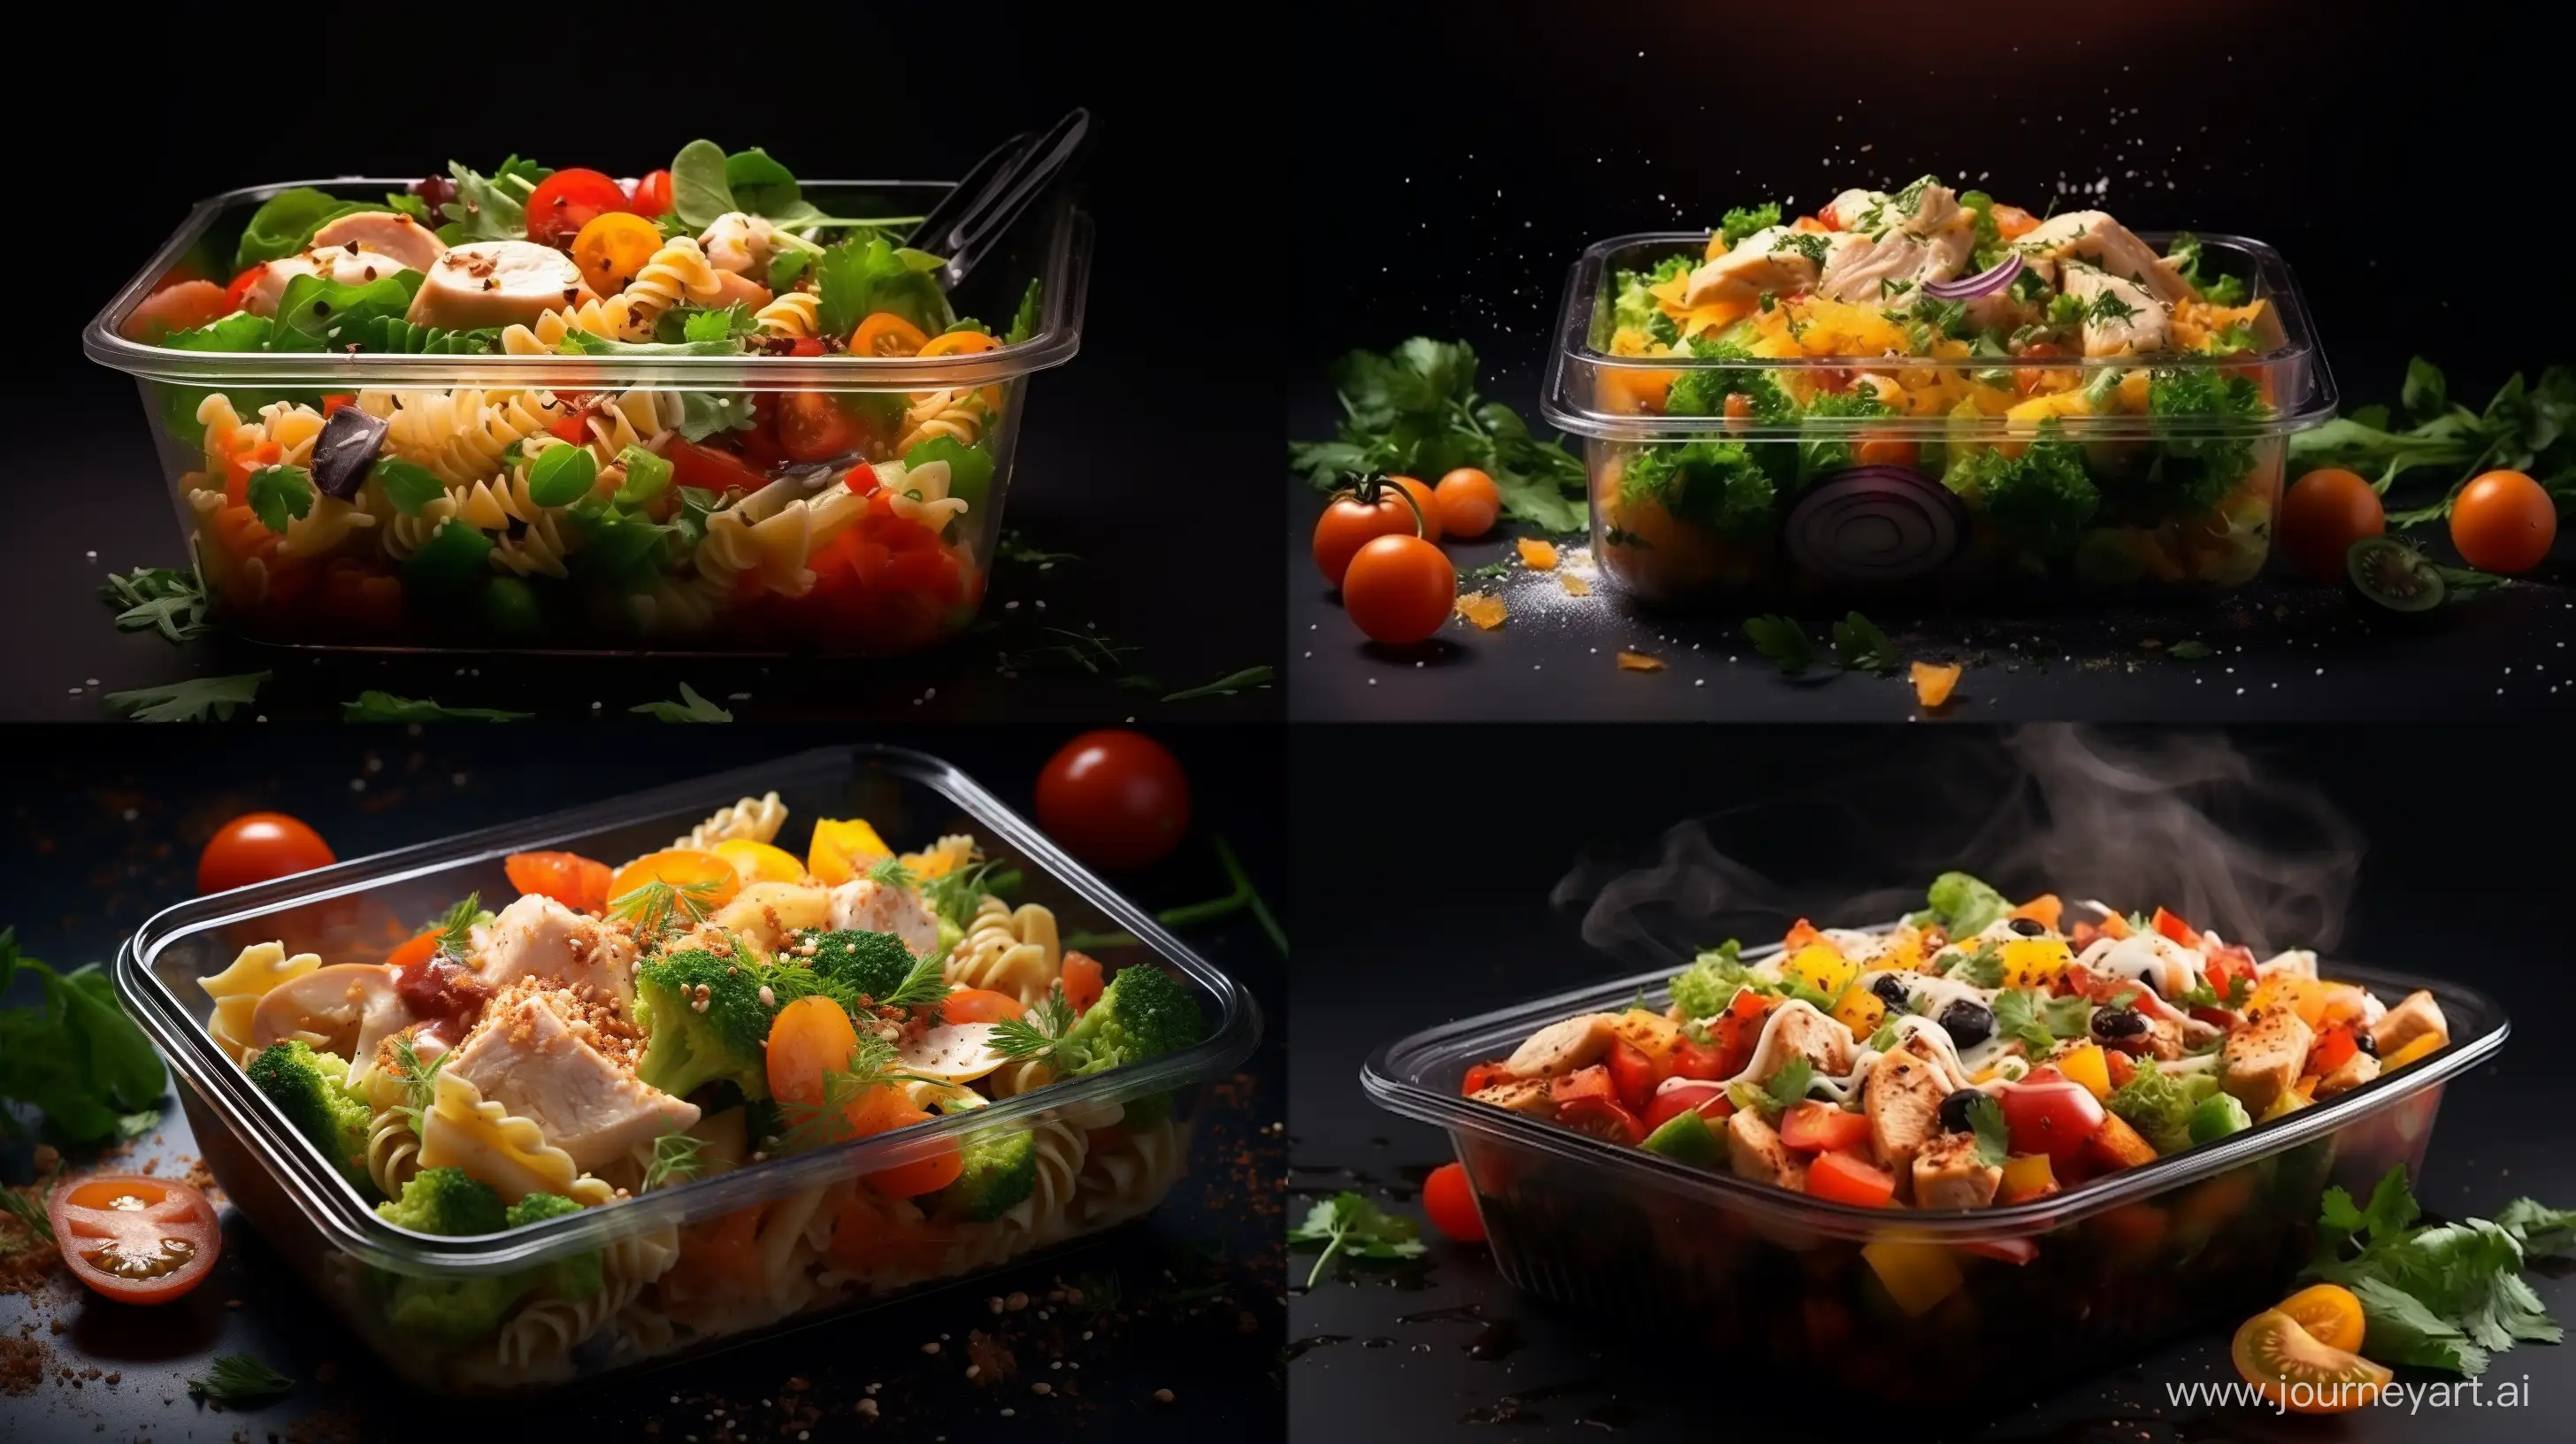 Delicious-Chicken-and-Vegetable-Pasta-Salad-in-Food-Container-HyperRealistic-Culinary-Photography